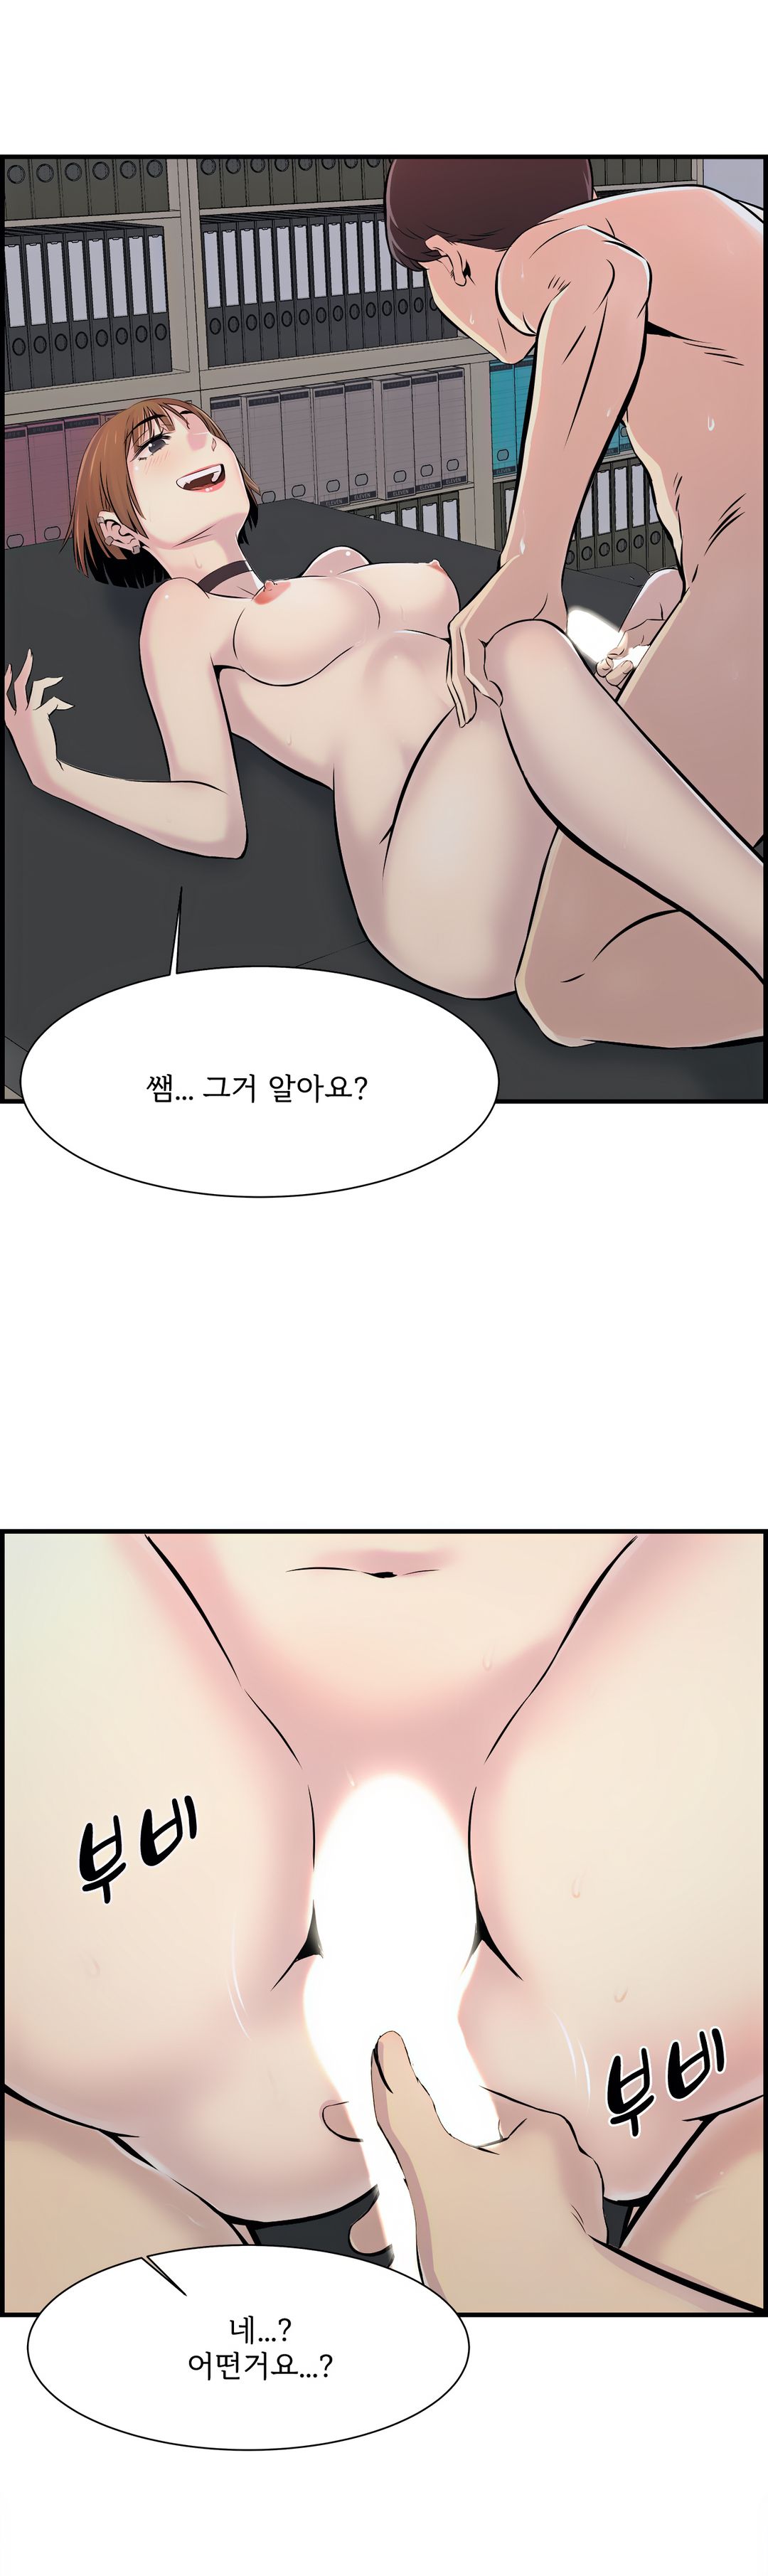 Cram School Scandal Raw - Chapter 3 Page 8